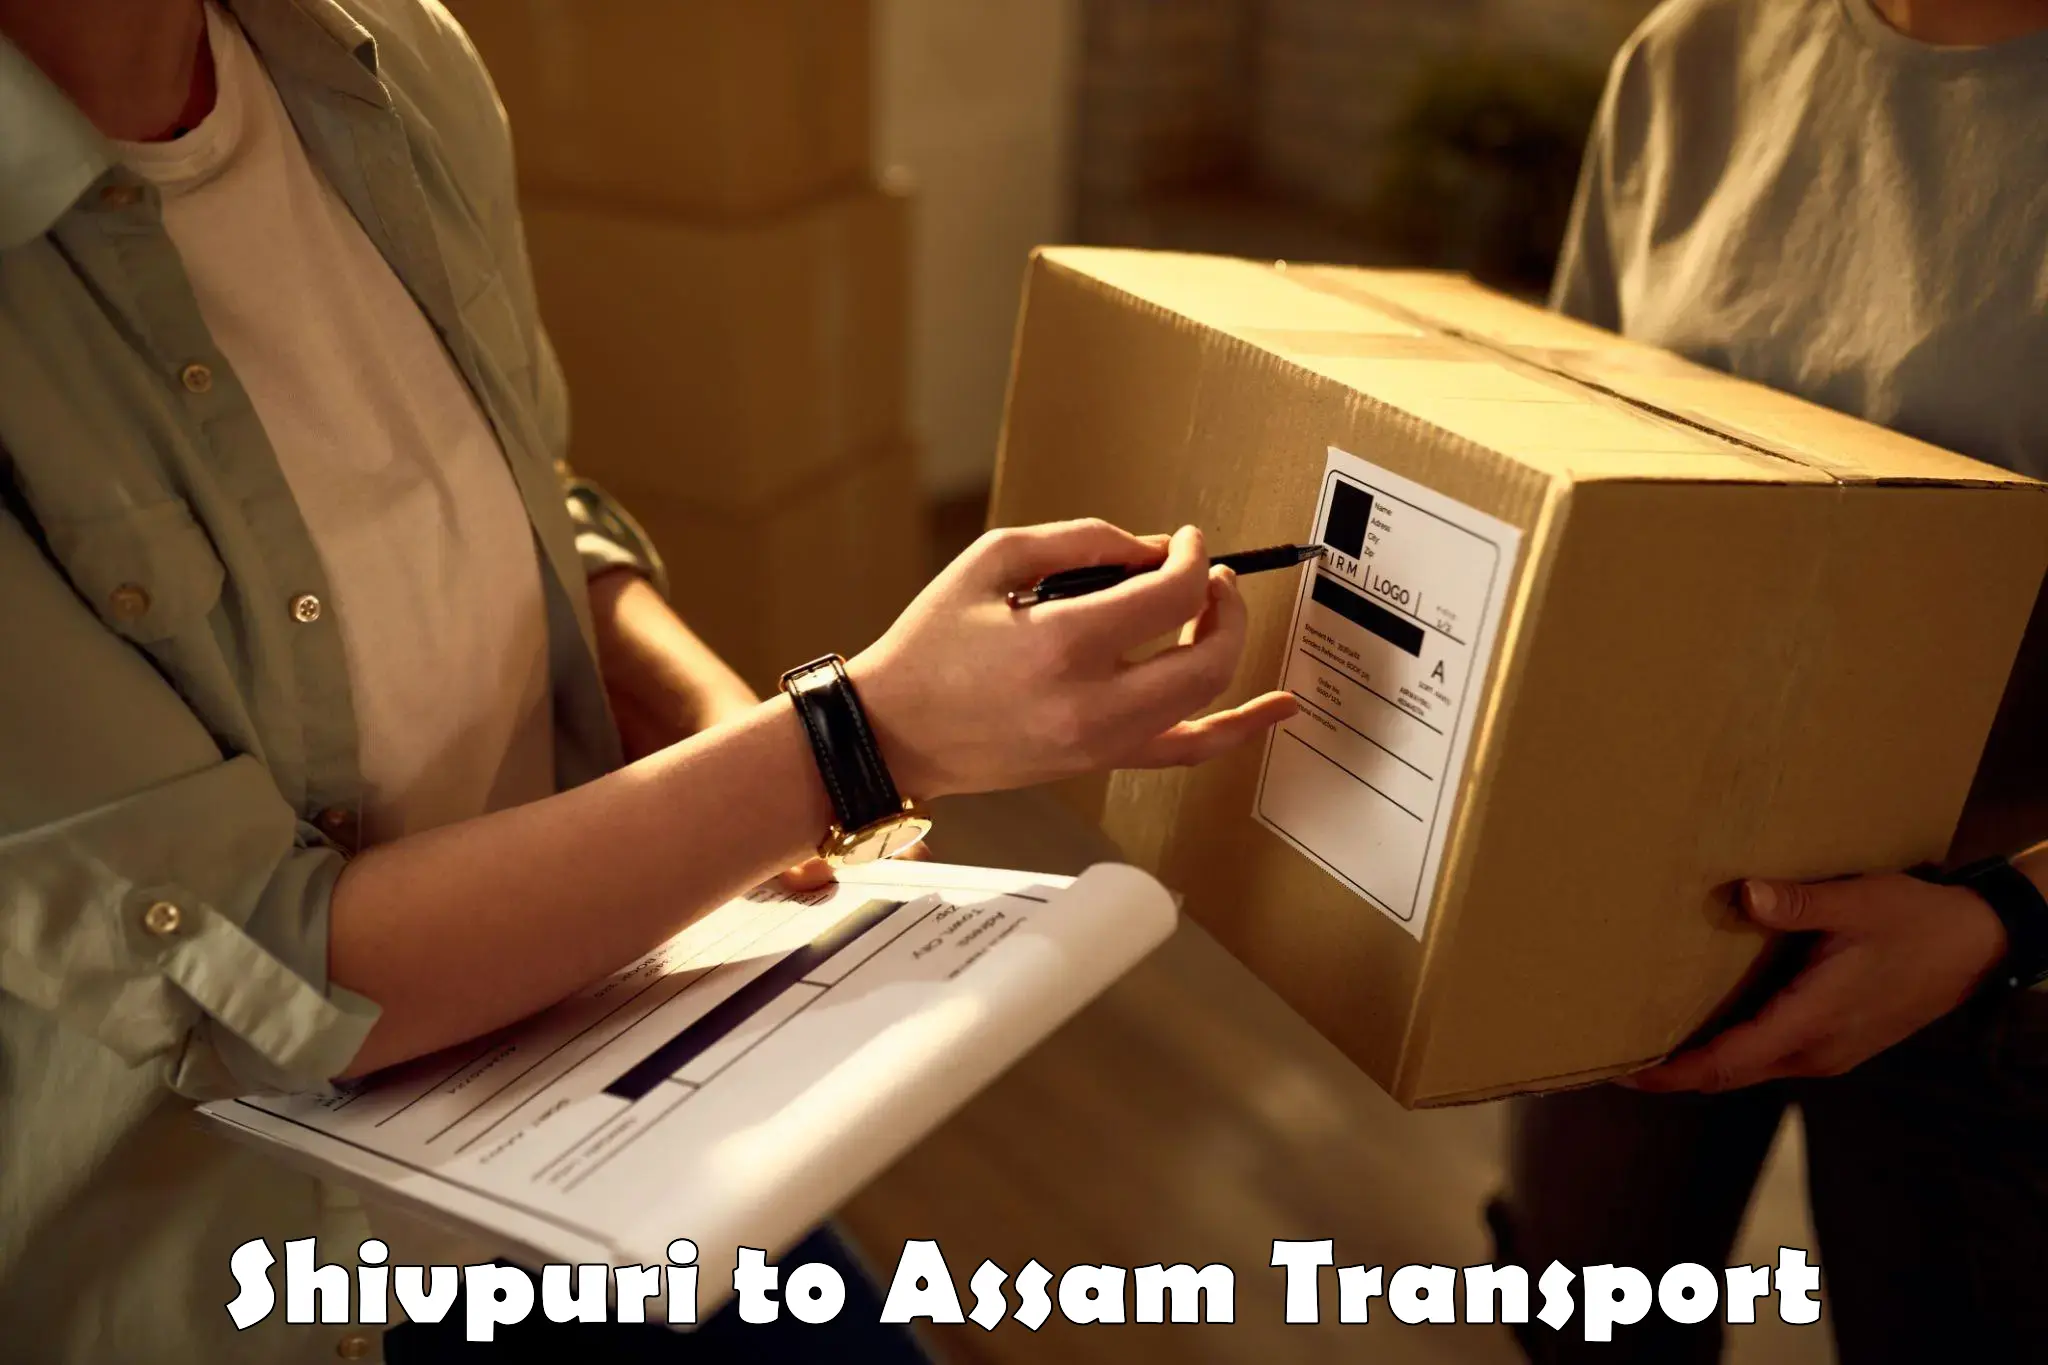 Transport bike from one state to another Shivpuri to Assam